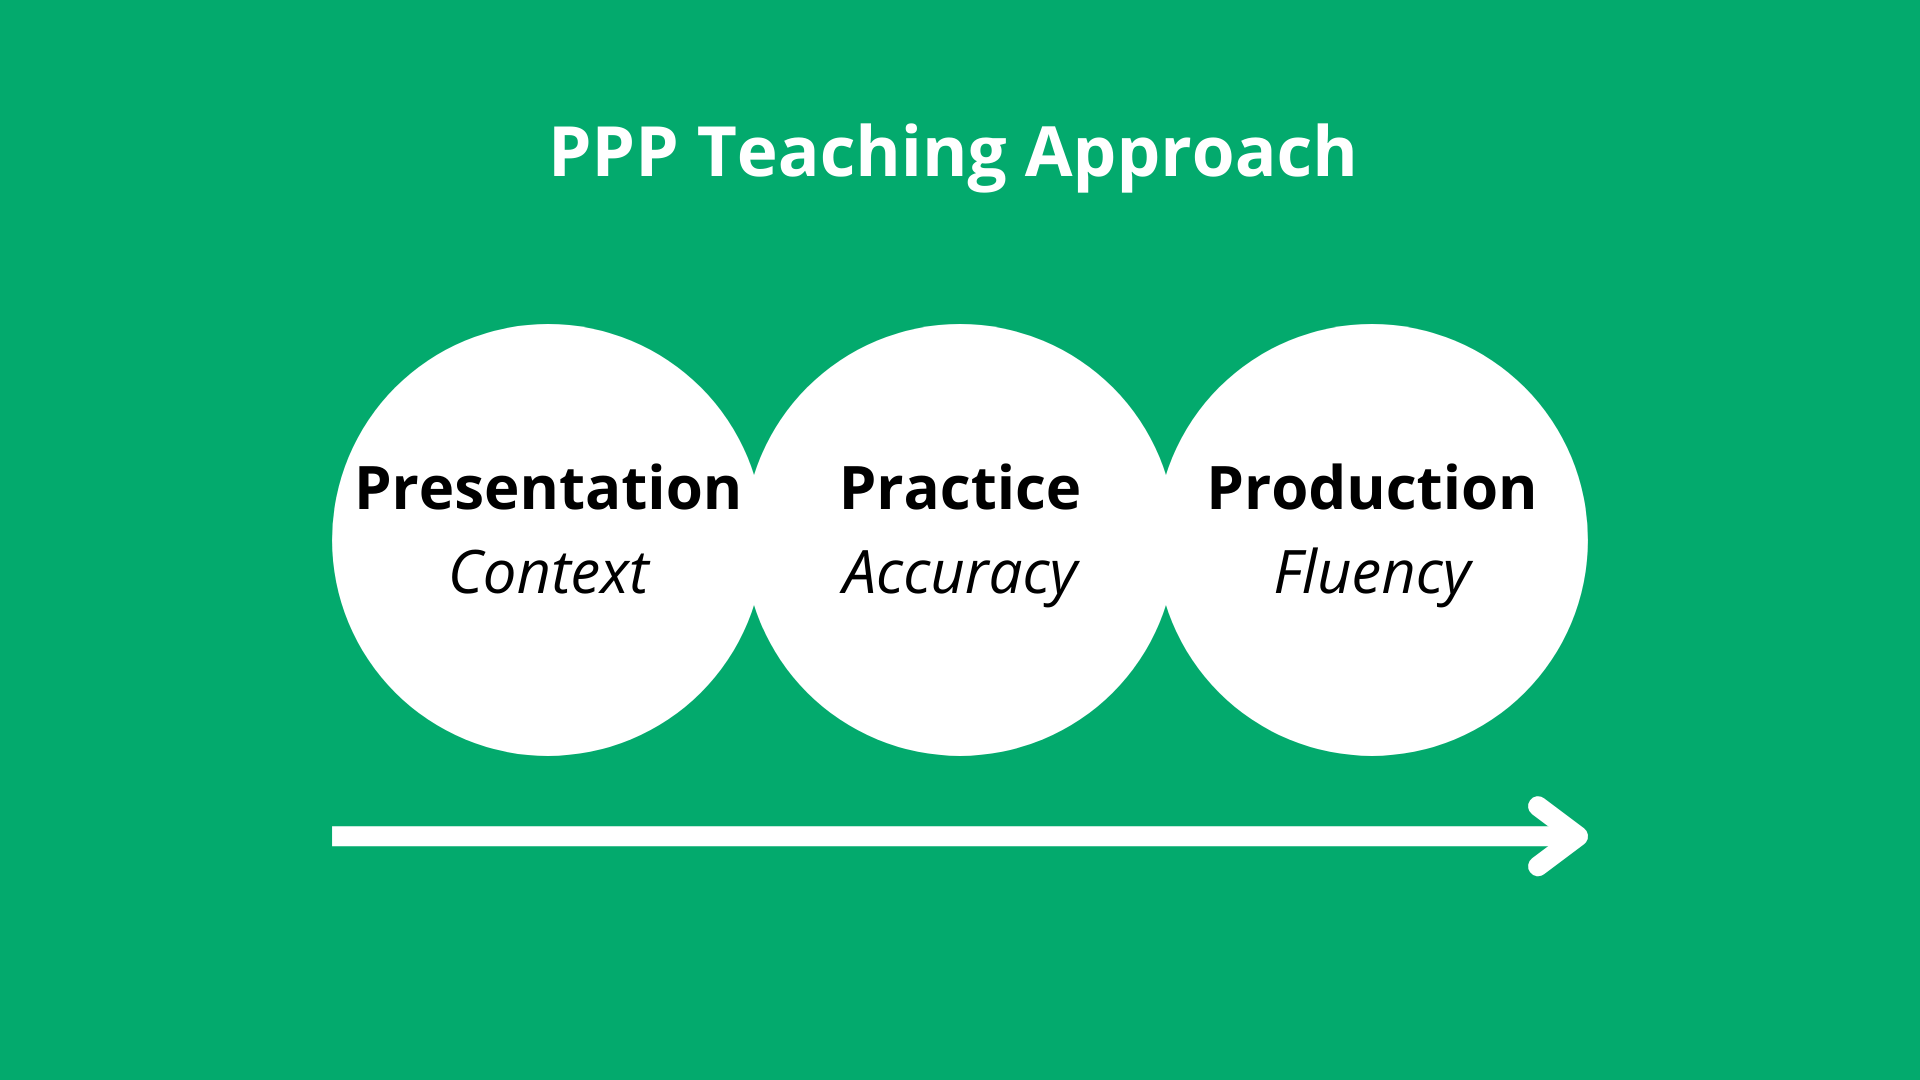 PPP teaching approach stages